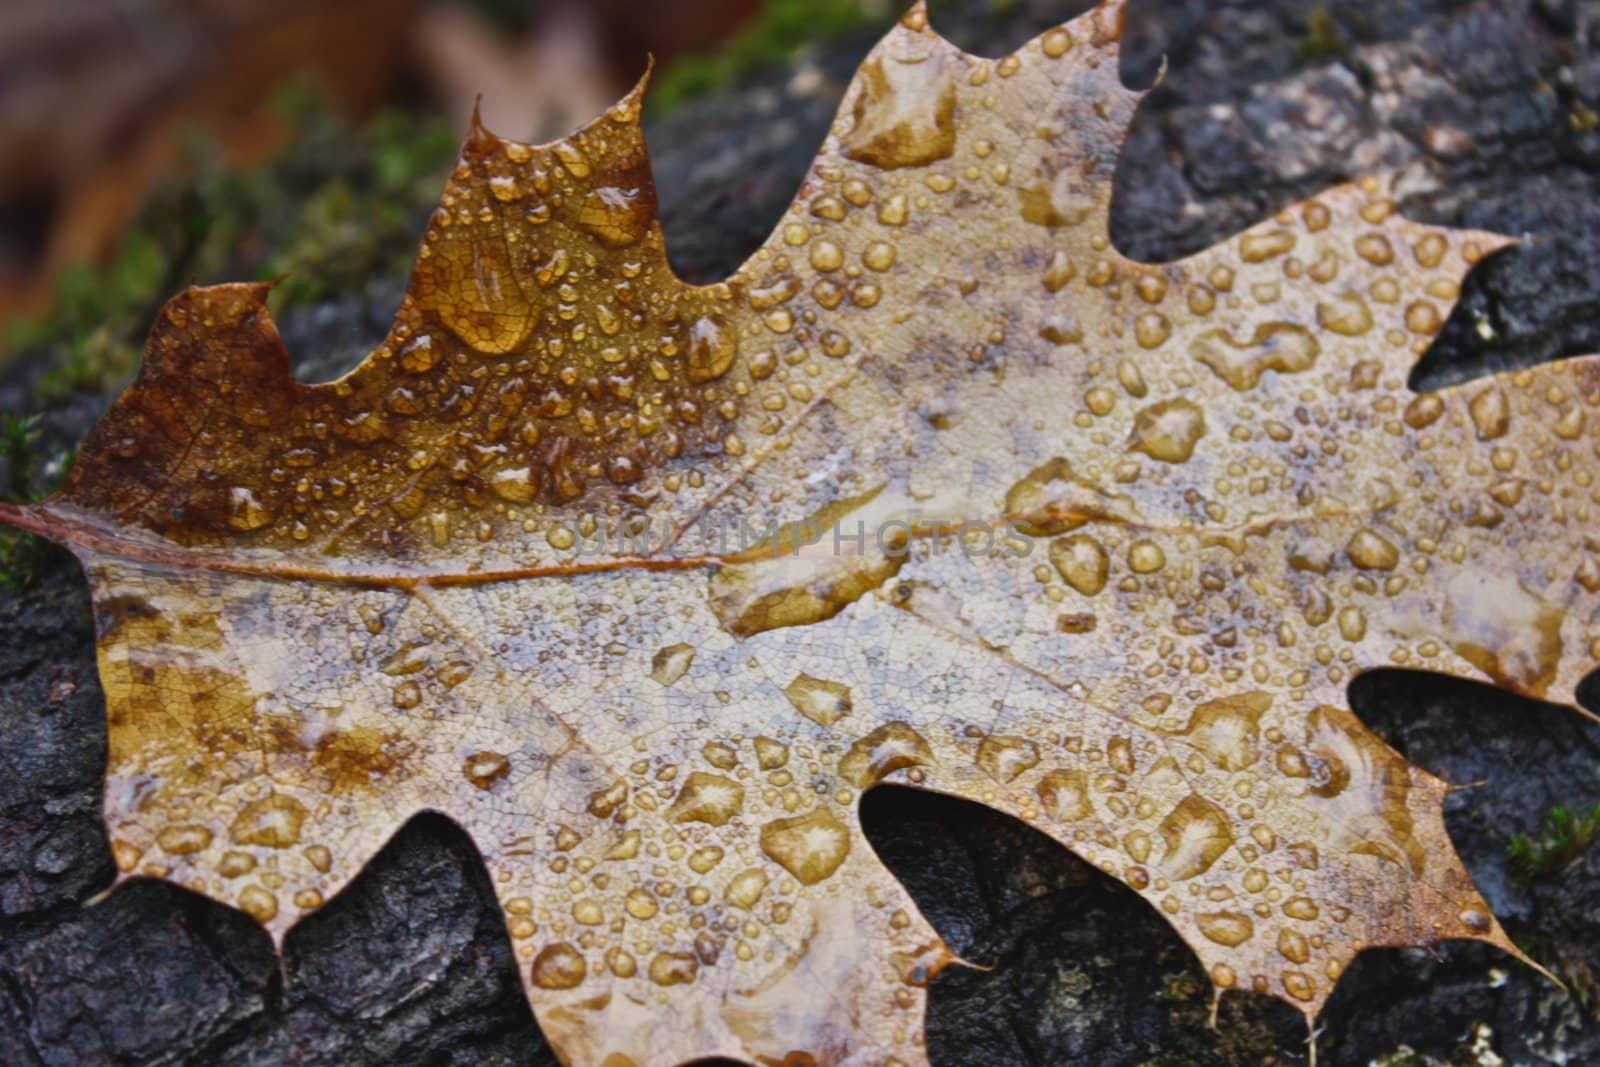 Brown leaf with water droplets